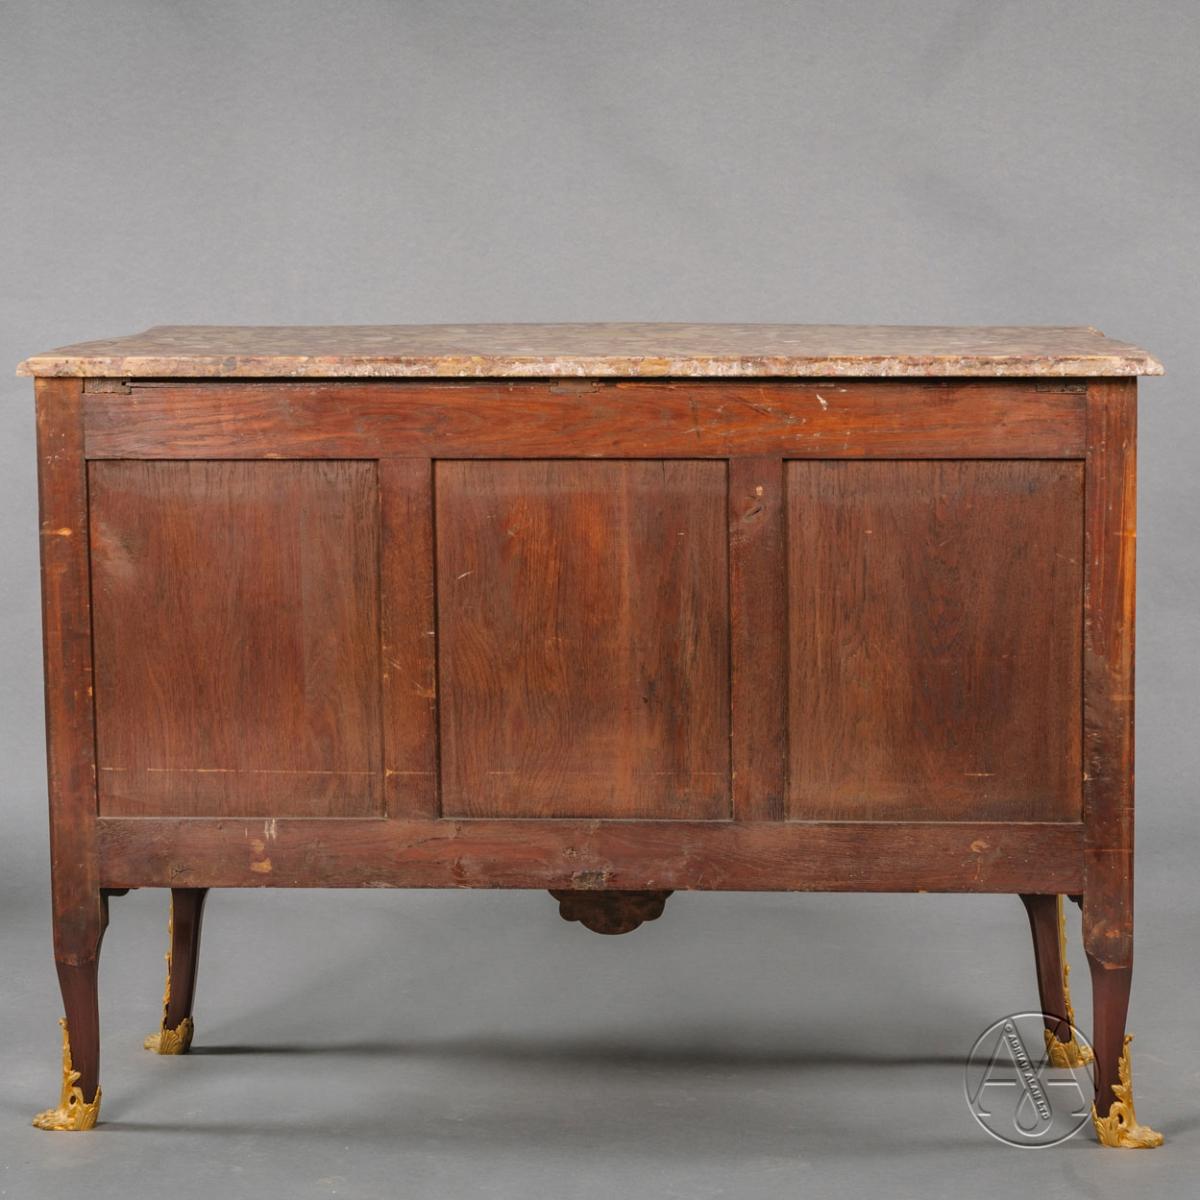 The Back of A Louis XV Style Marquetry Commode By Durand Dating From Circa 1880